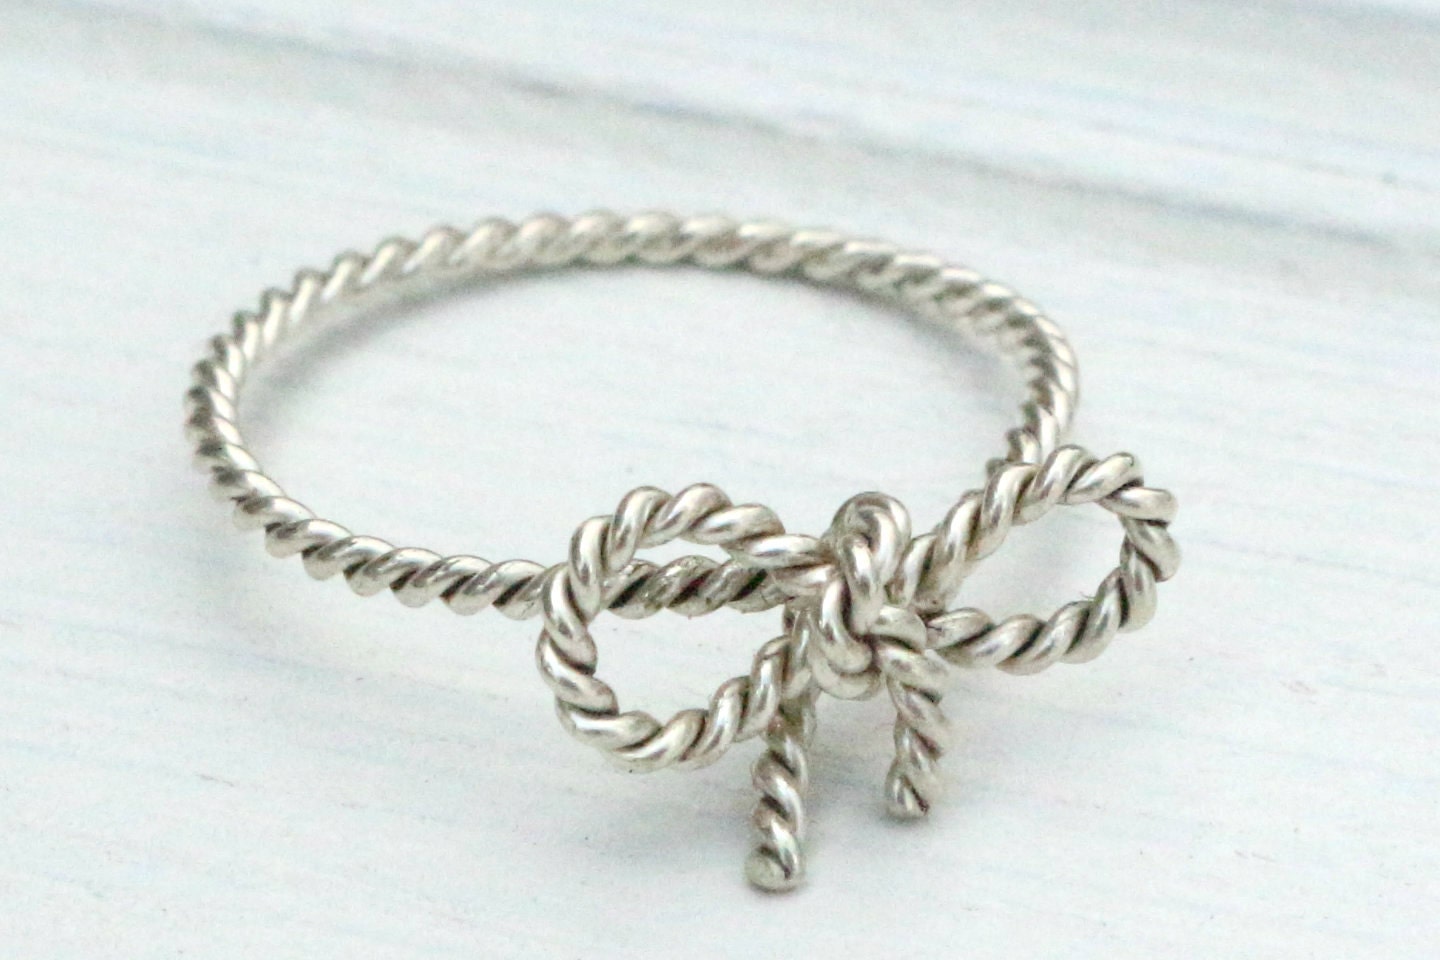 TINY BOW Ring - Forget Me KNOT Ring - Twisted Sterling Silver